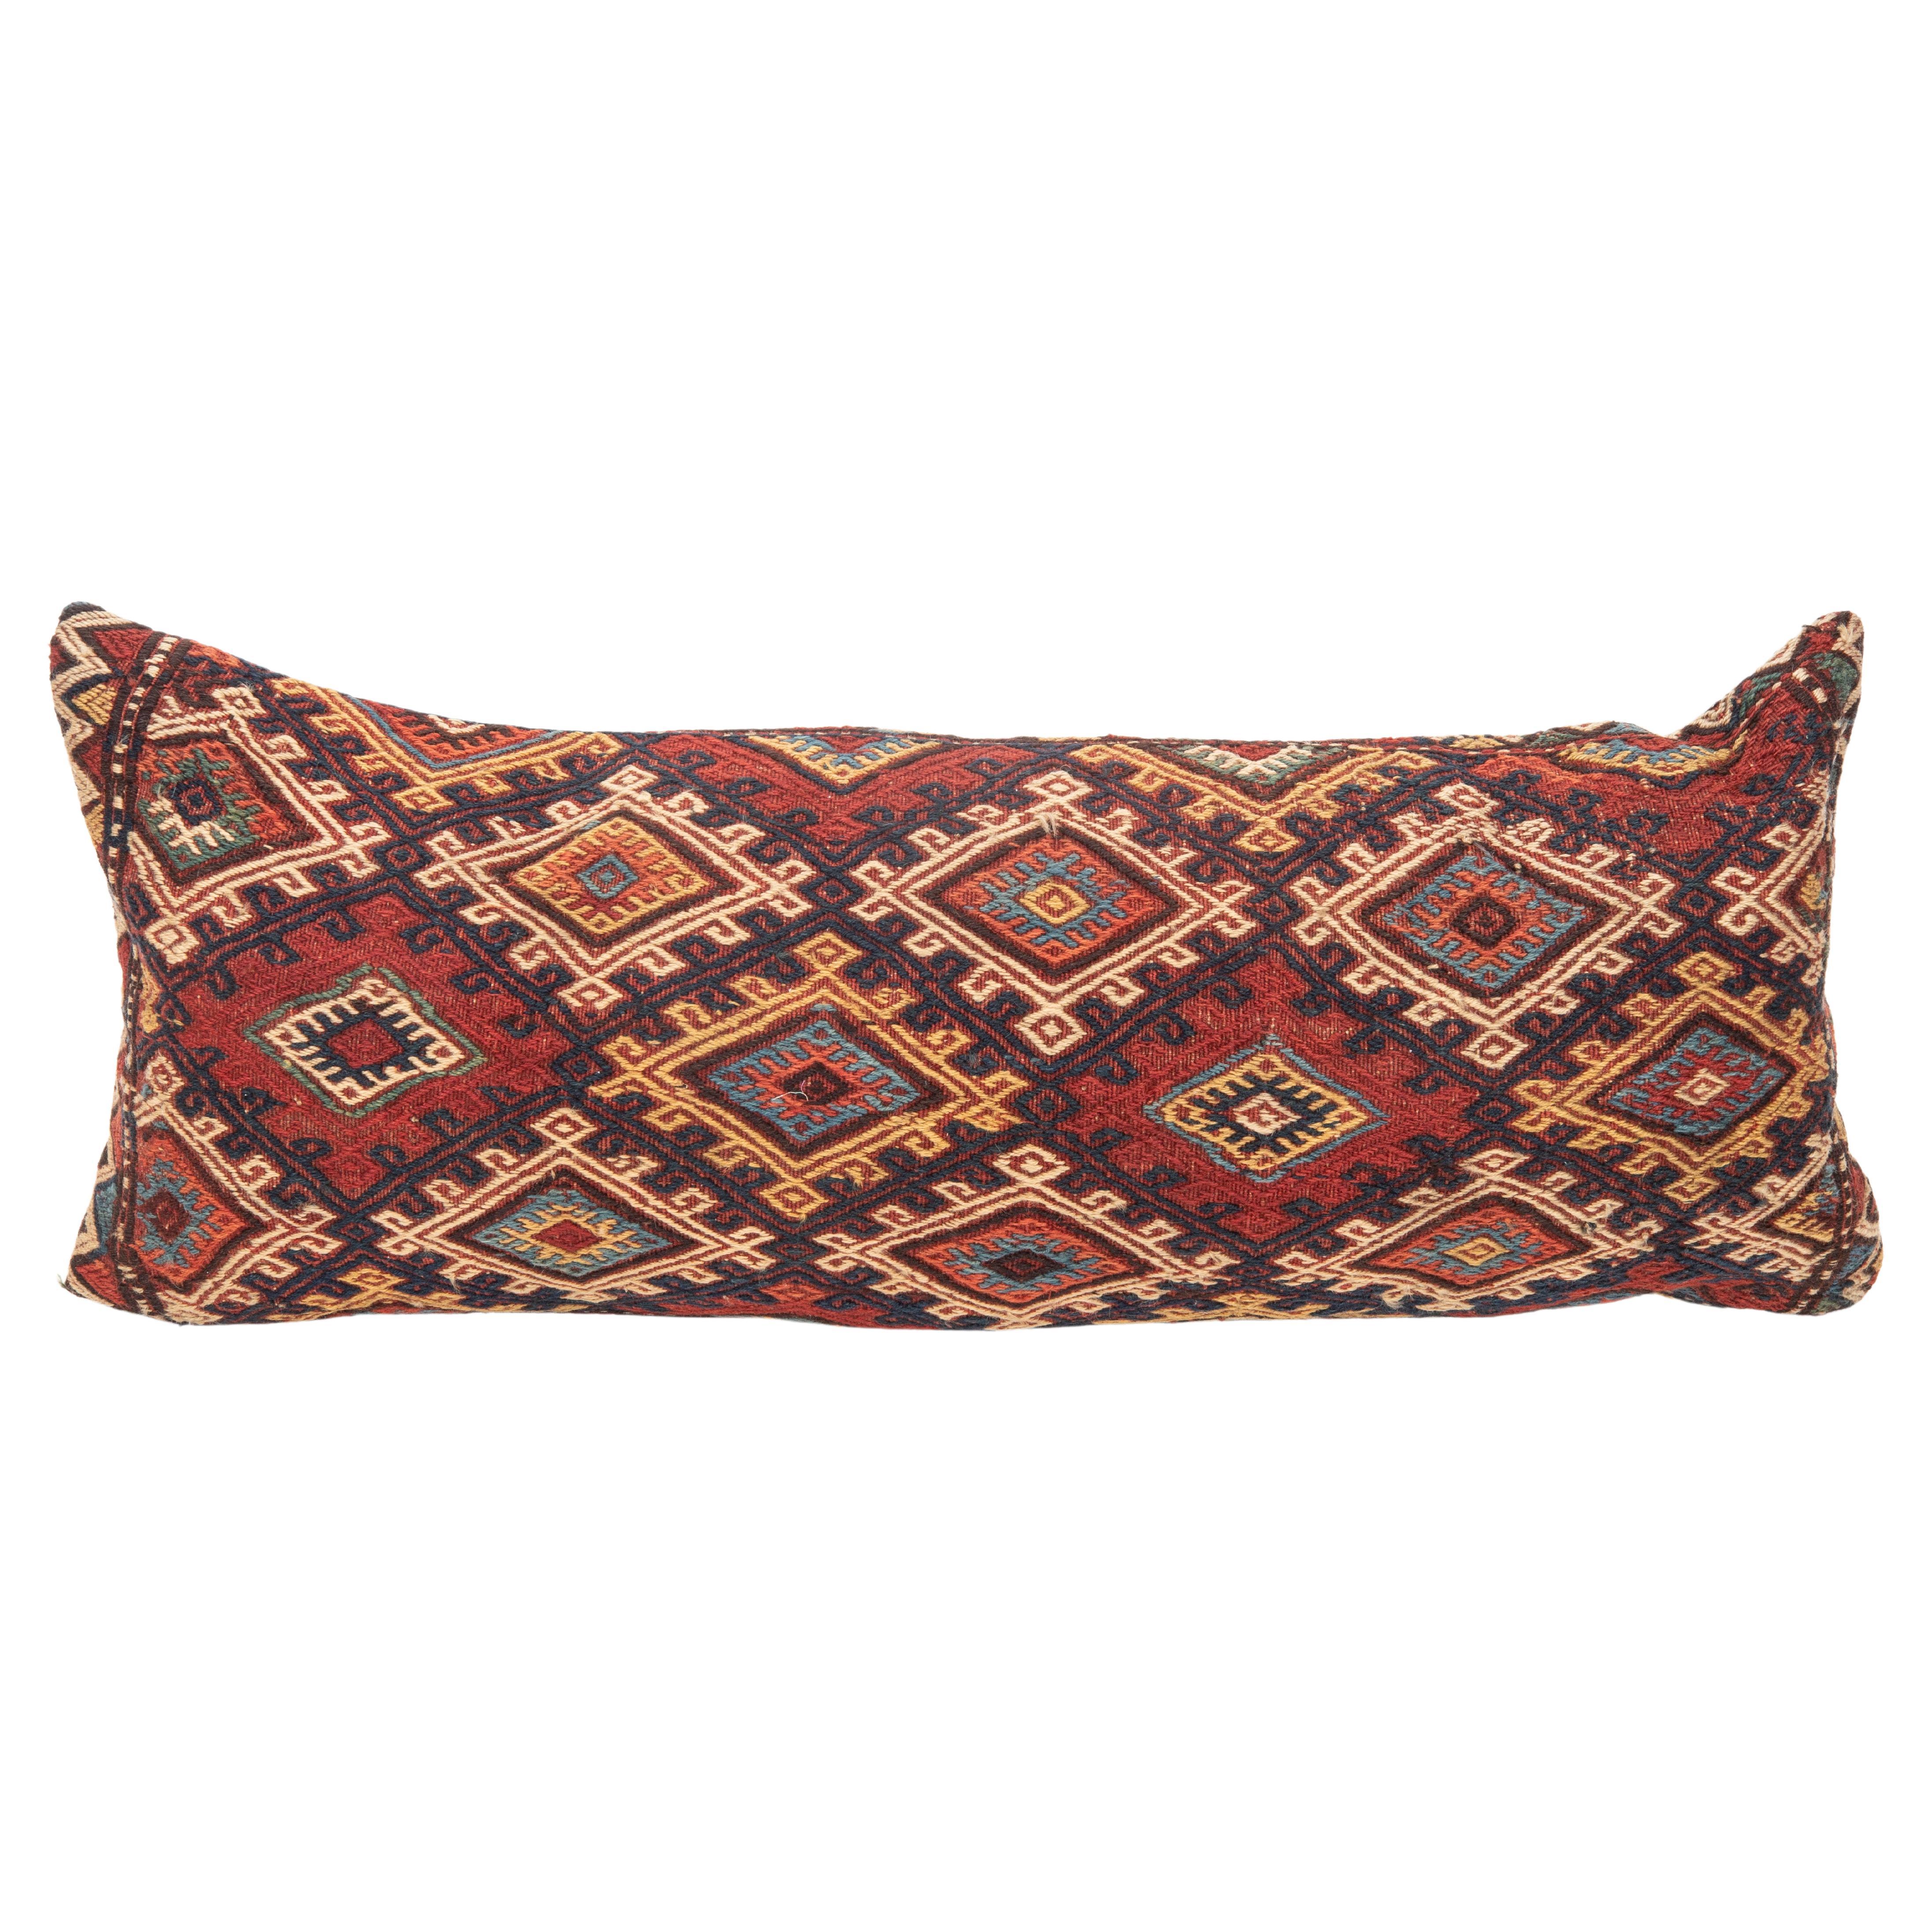 Pillow Cover Fashioned from an Antique Caucasian Mafrash ( storage Bag ) Panel For Sale